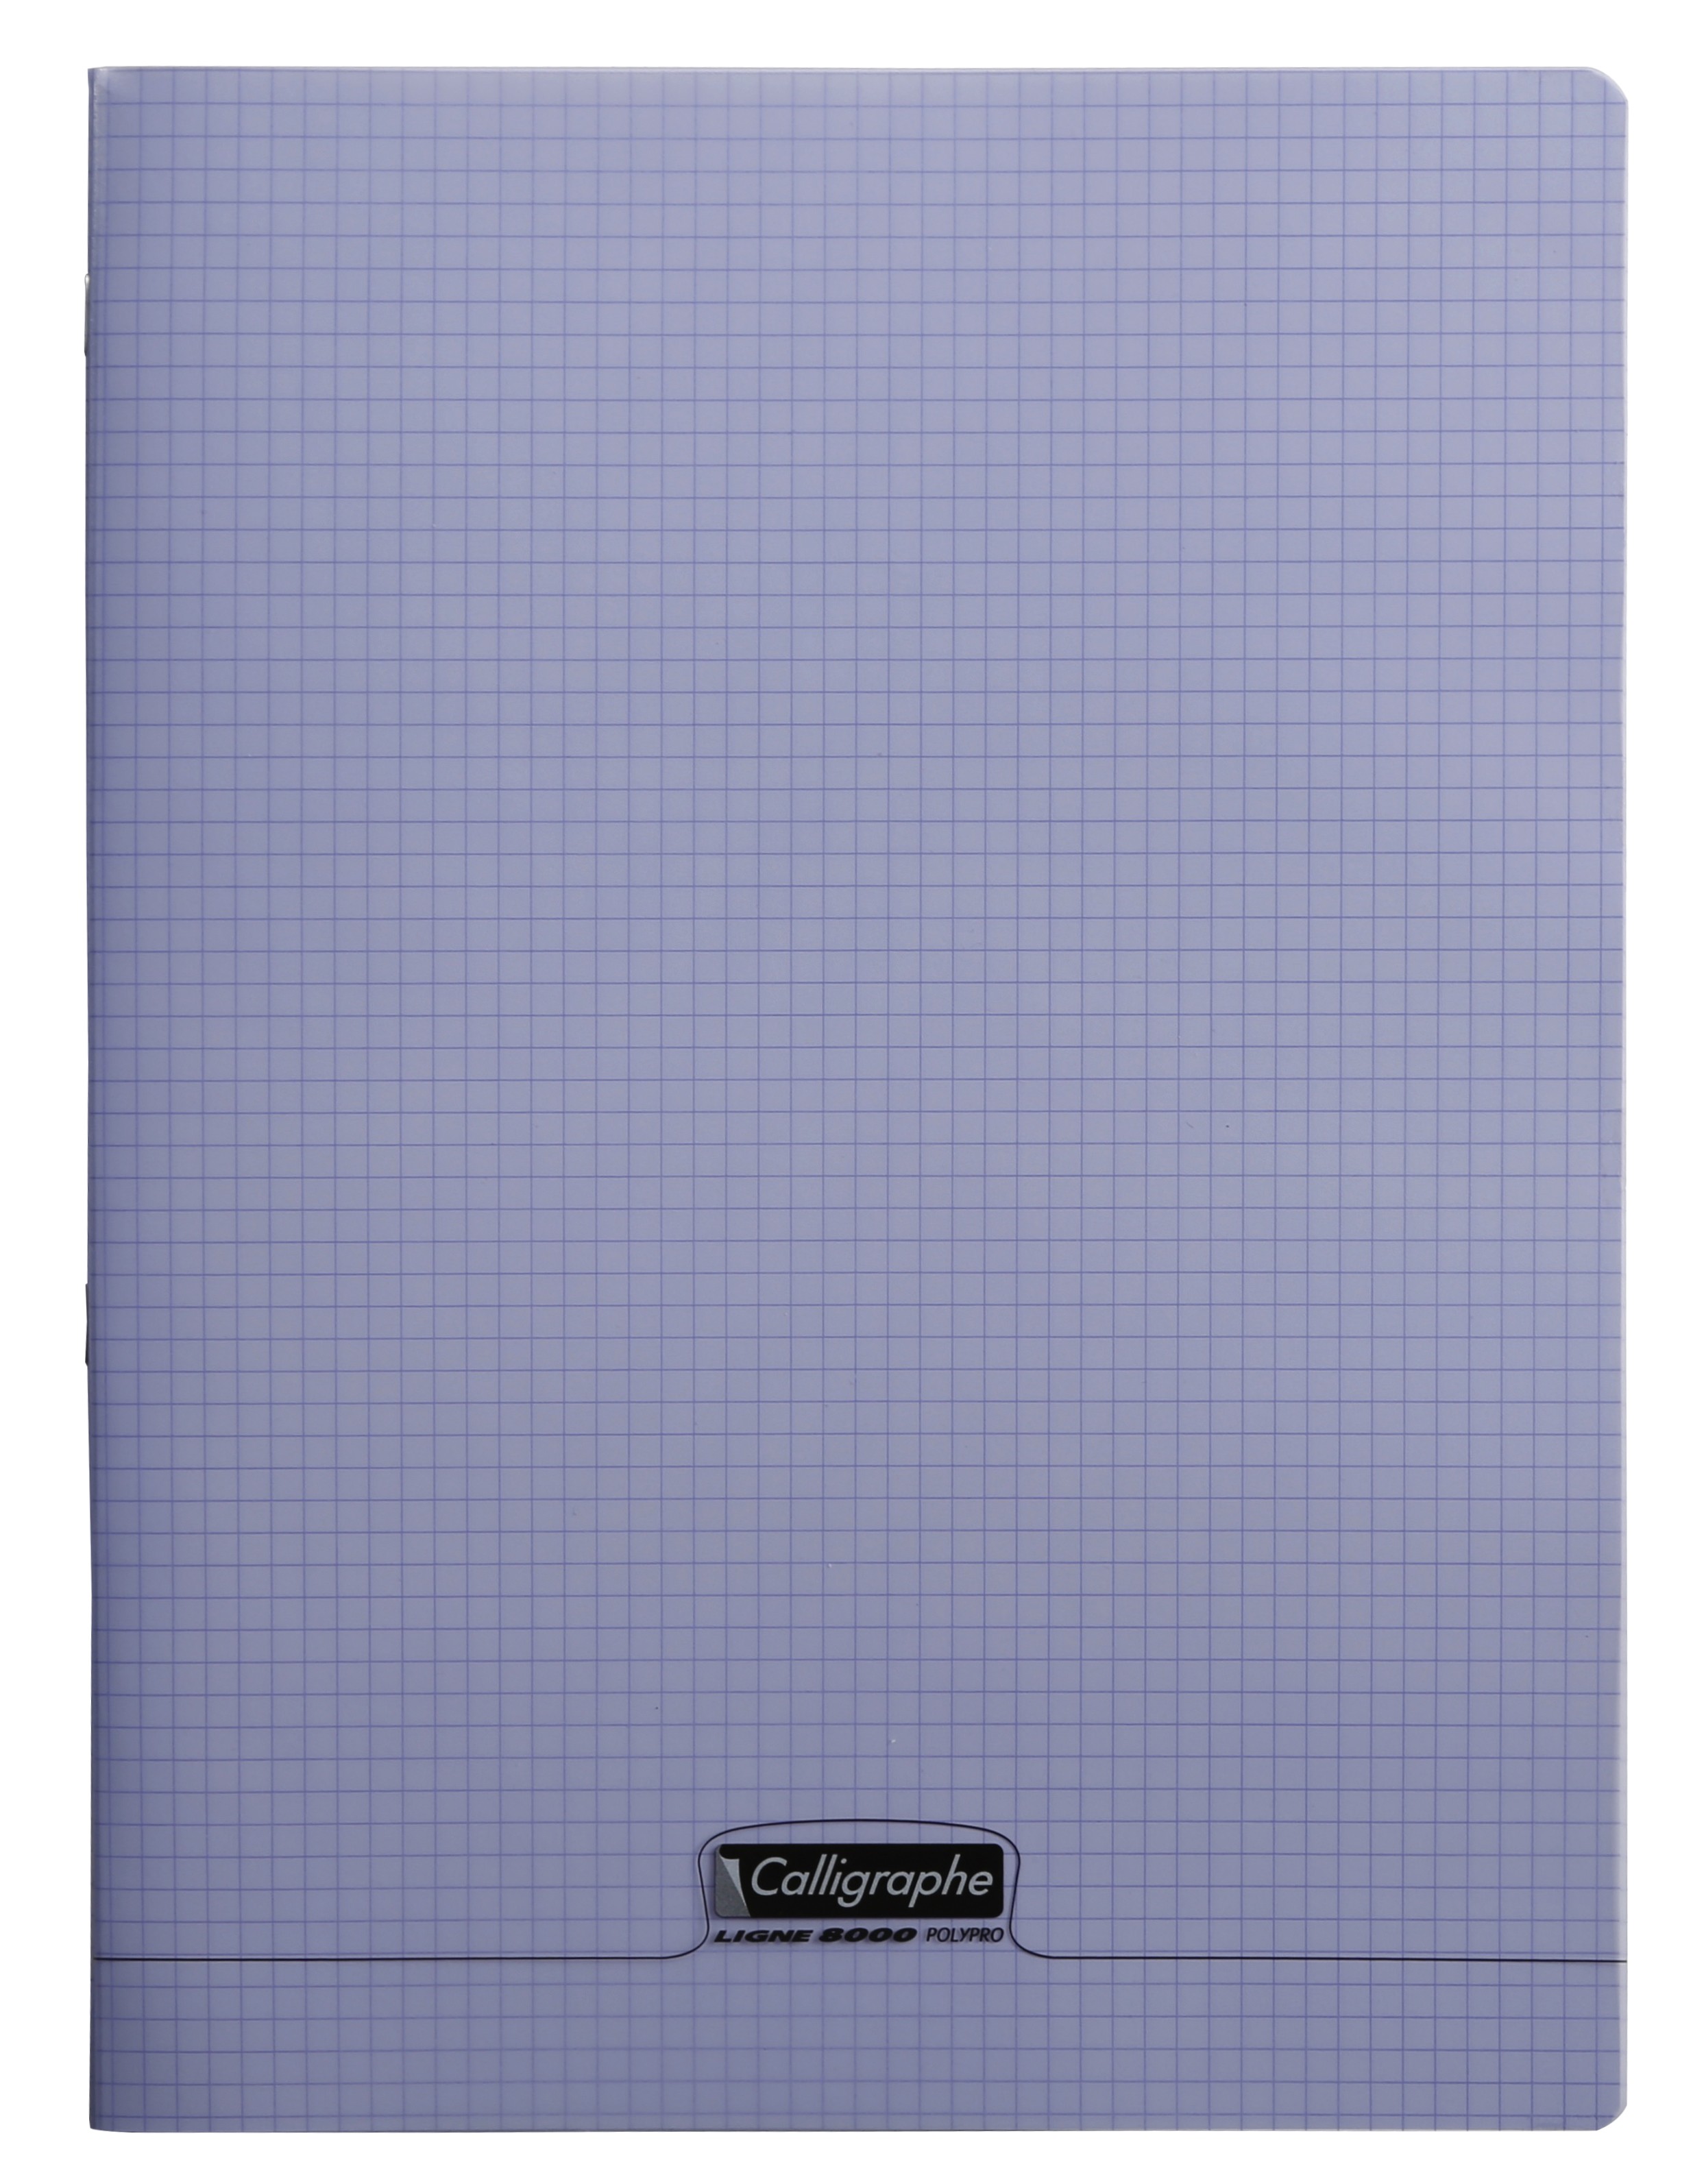 4 cahiers 34x32 grands carreaux 96 pages polypro